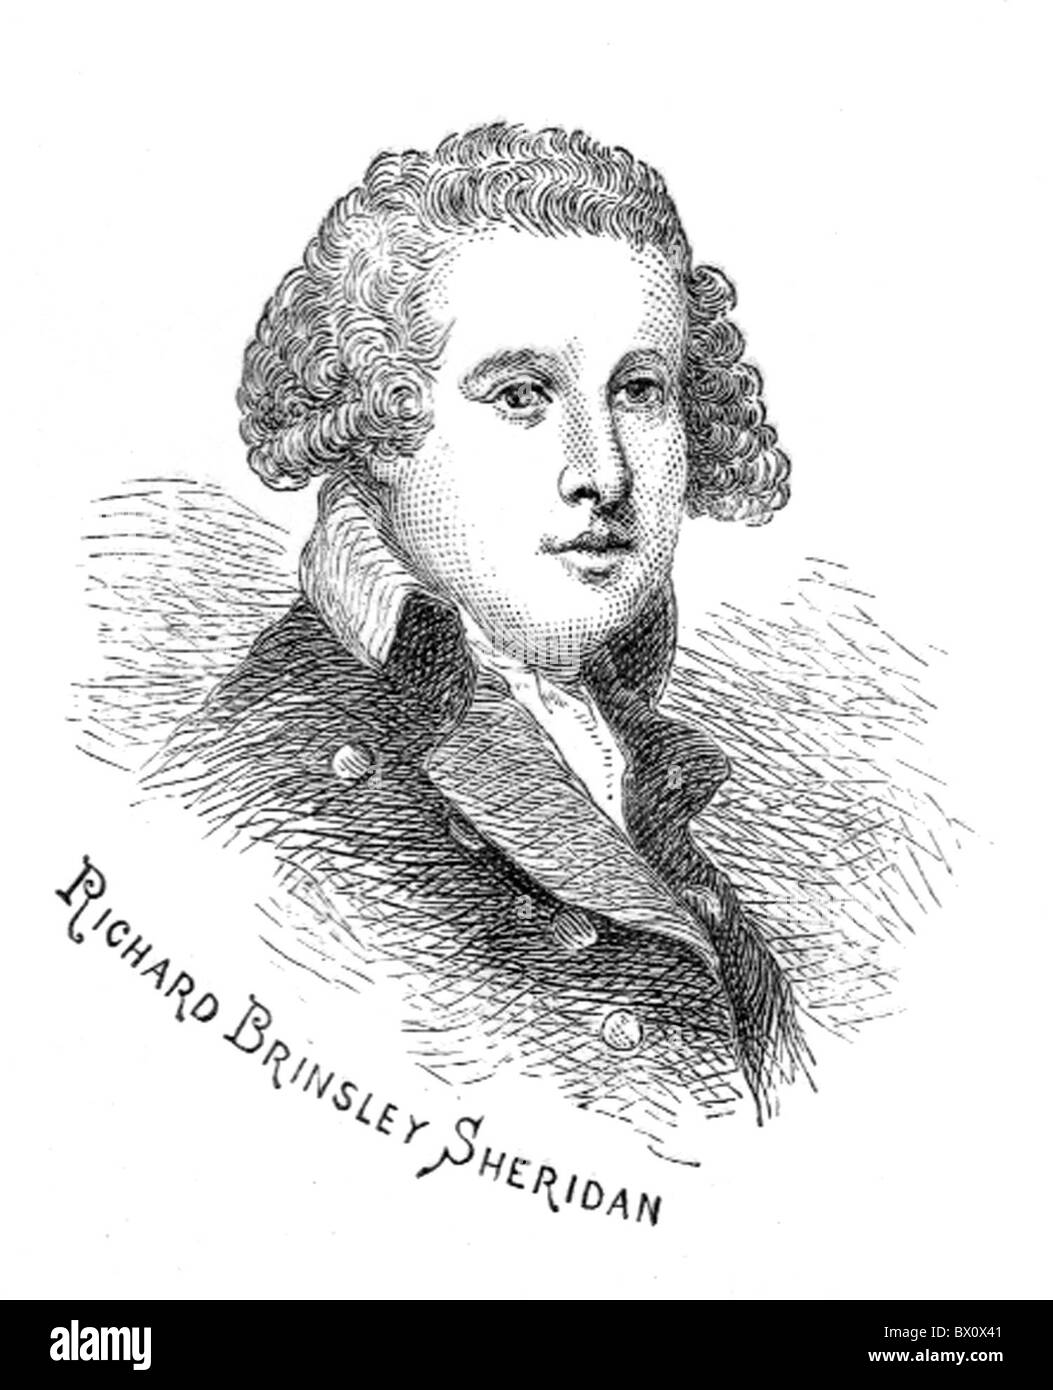 Archive image of historical literary figures. This is Richard Brinsley Sheridan. Stock Photo